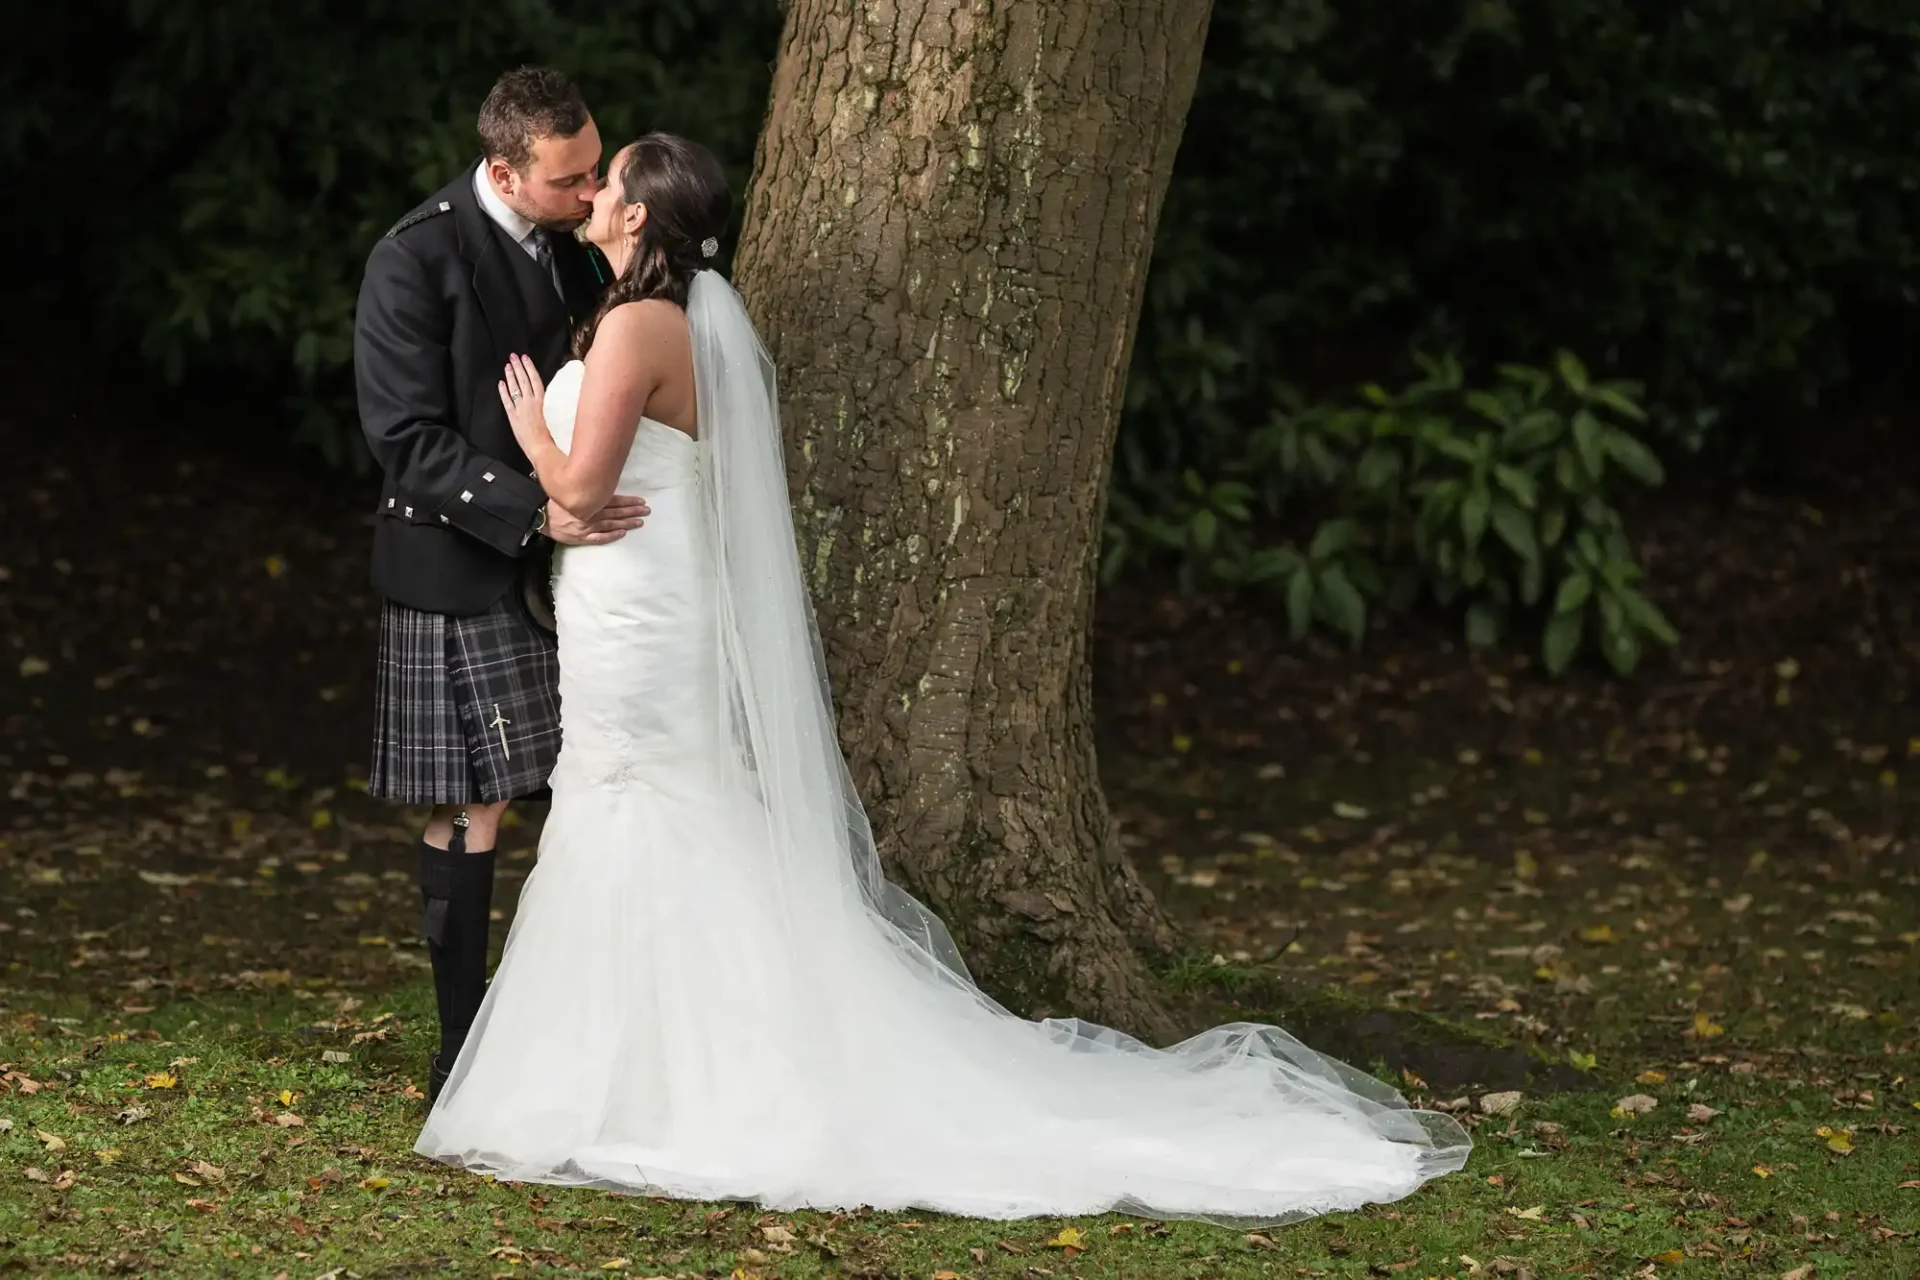 A bride in a long white dress and a groom in a kilt share a kiss under a tree in a park, surrounded by fallen leaves.